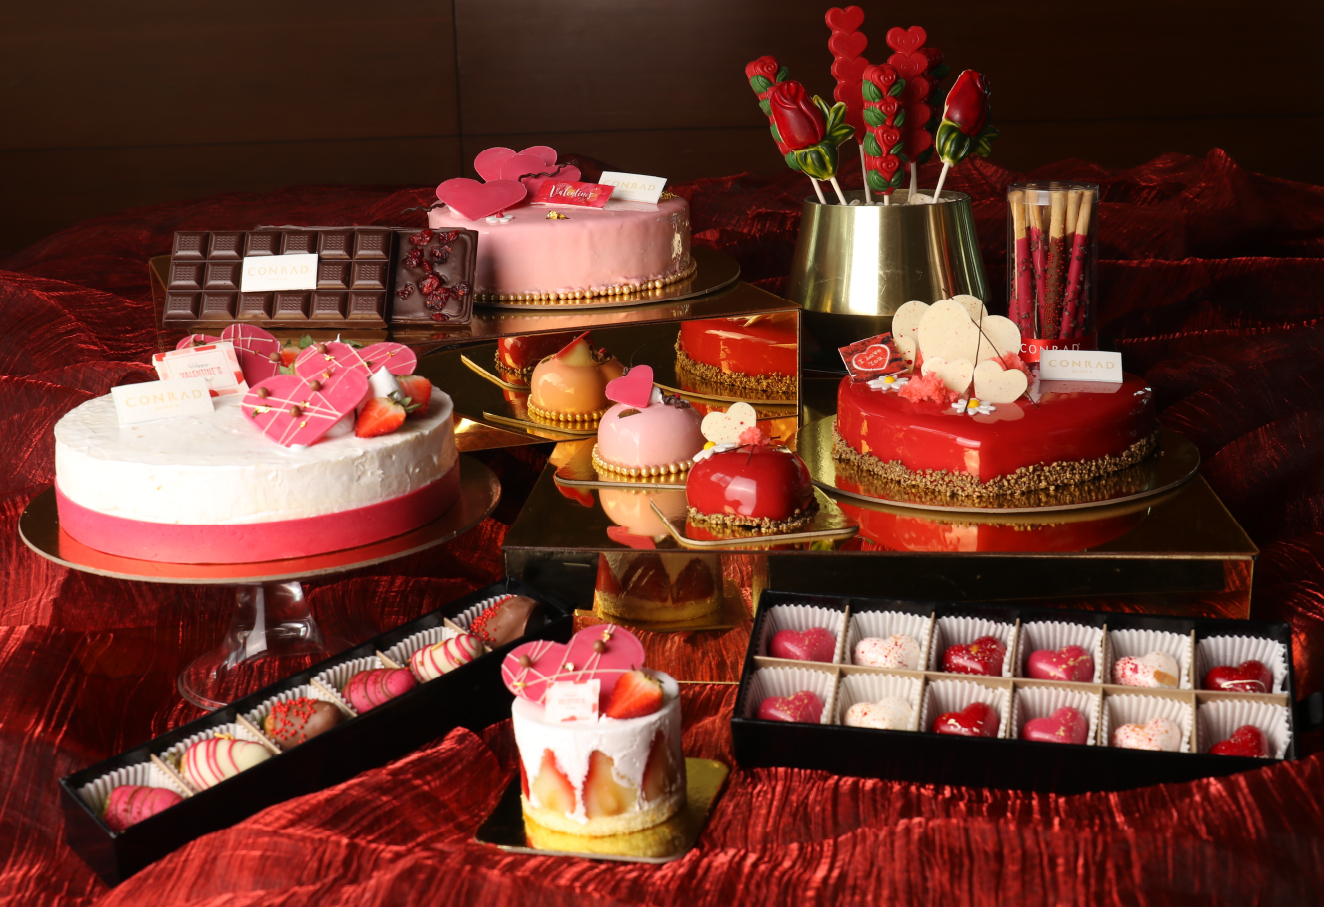 The photo shows a variety of Valentine's Day-themed desserts.